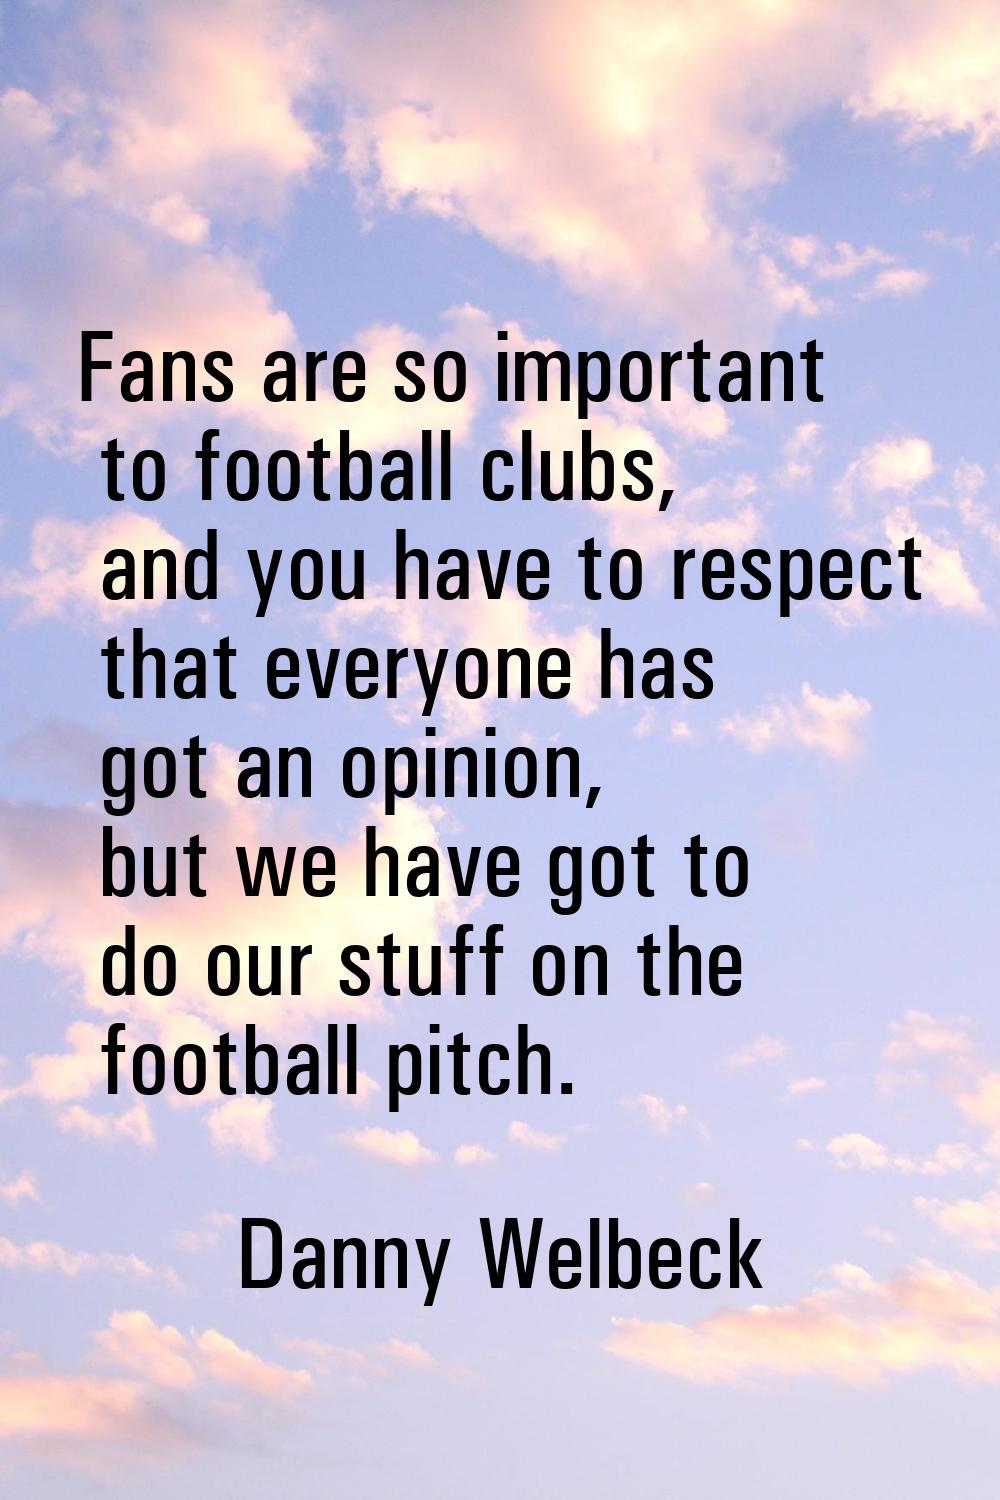 Fans are so important to football clubs, and you have to respect that everyone has got an opinion, 